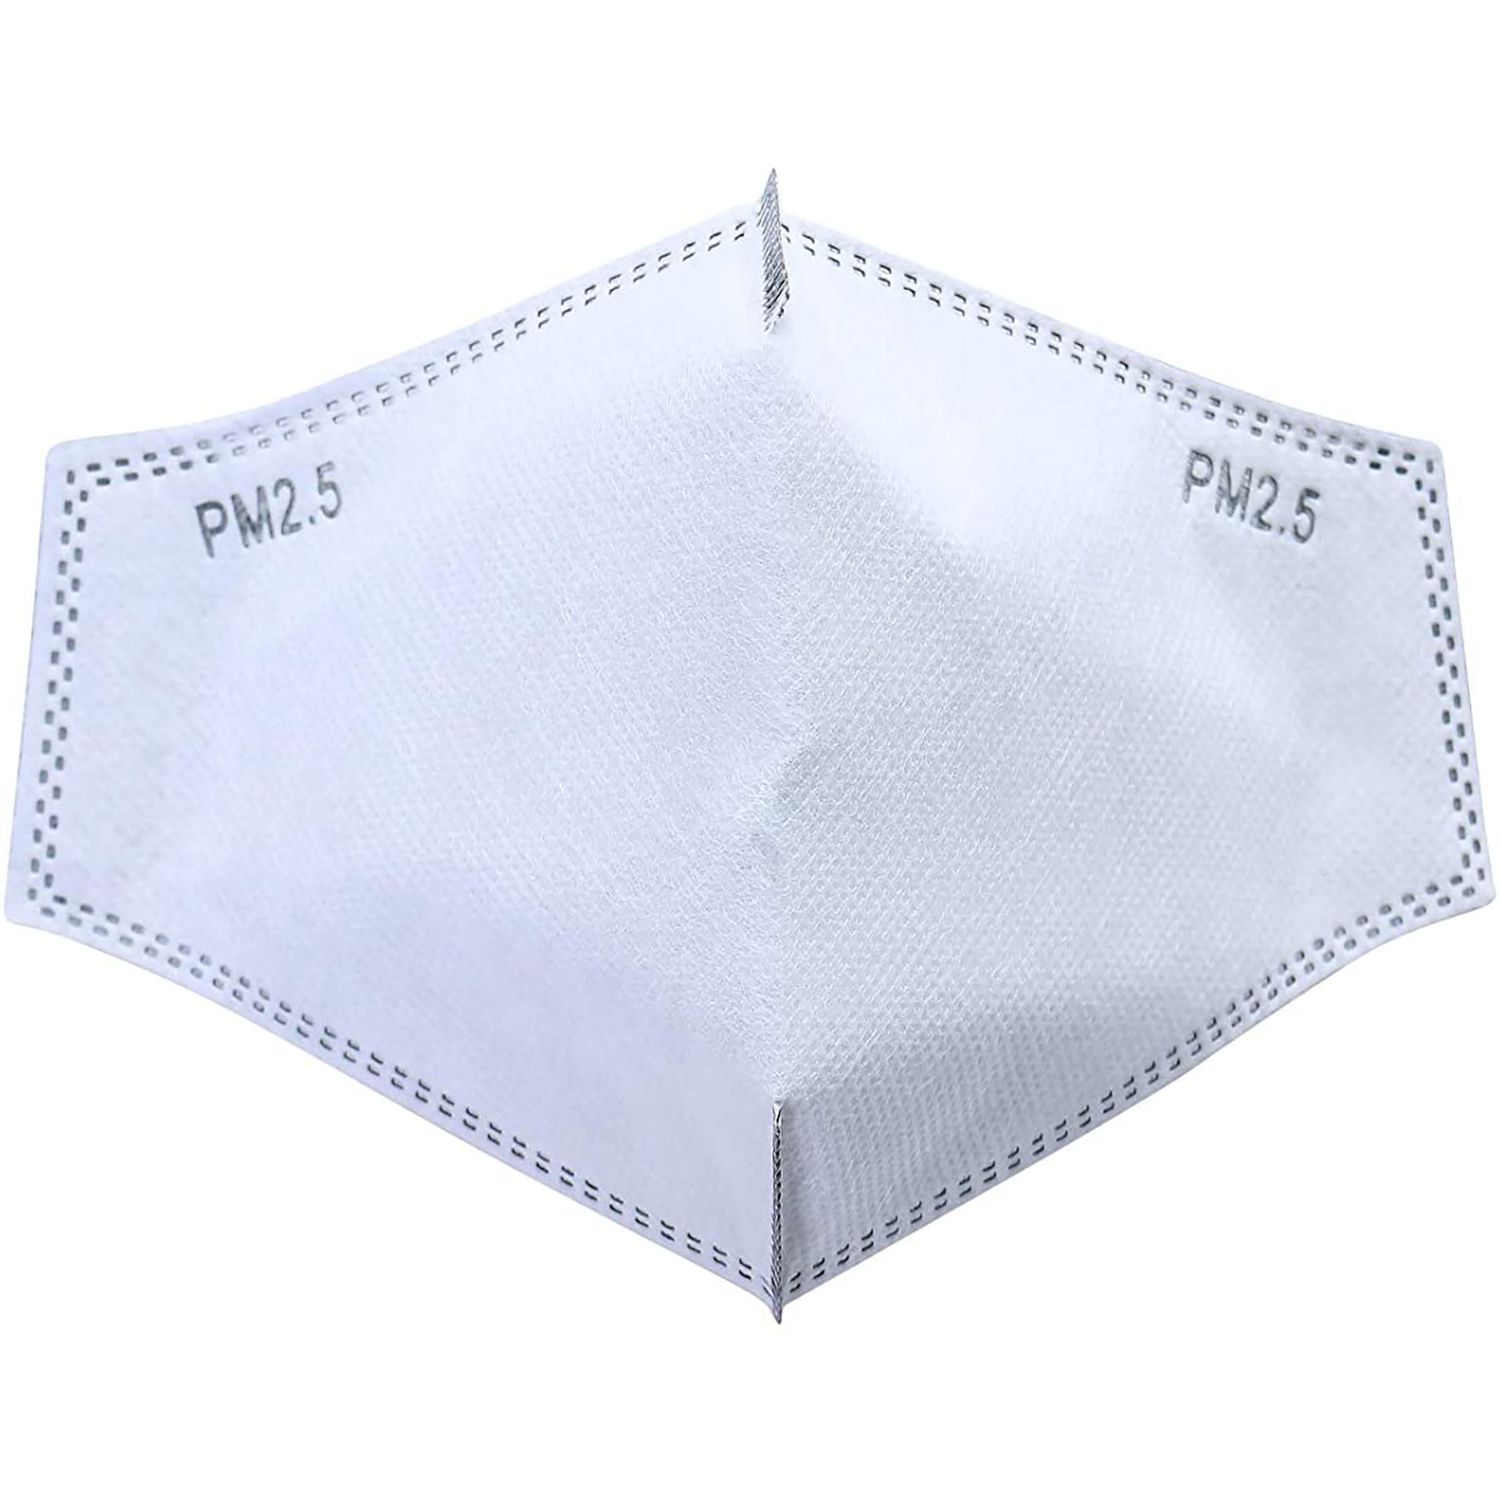 50 Pcs PM2.5 Filters Replacement Insert Activated Carbon Filter Replaceable for Face Mouth Protection 5 Layers Anti Haze for Outdoor with Prime